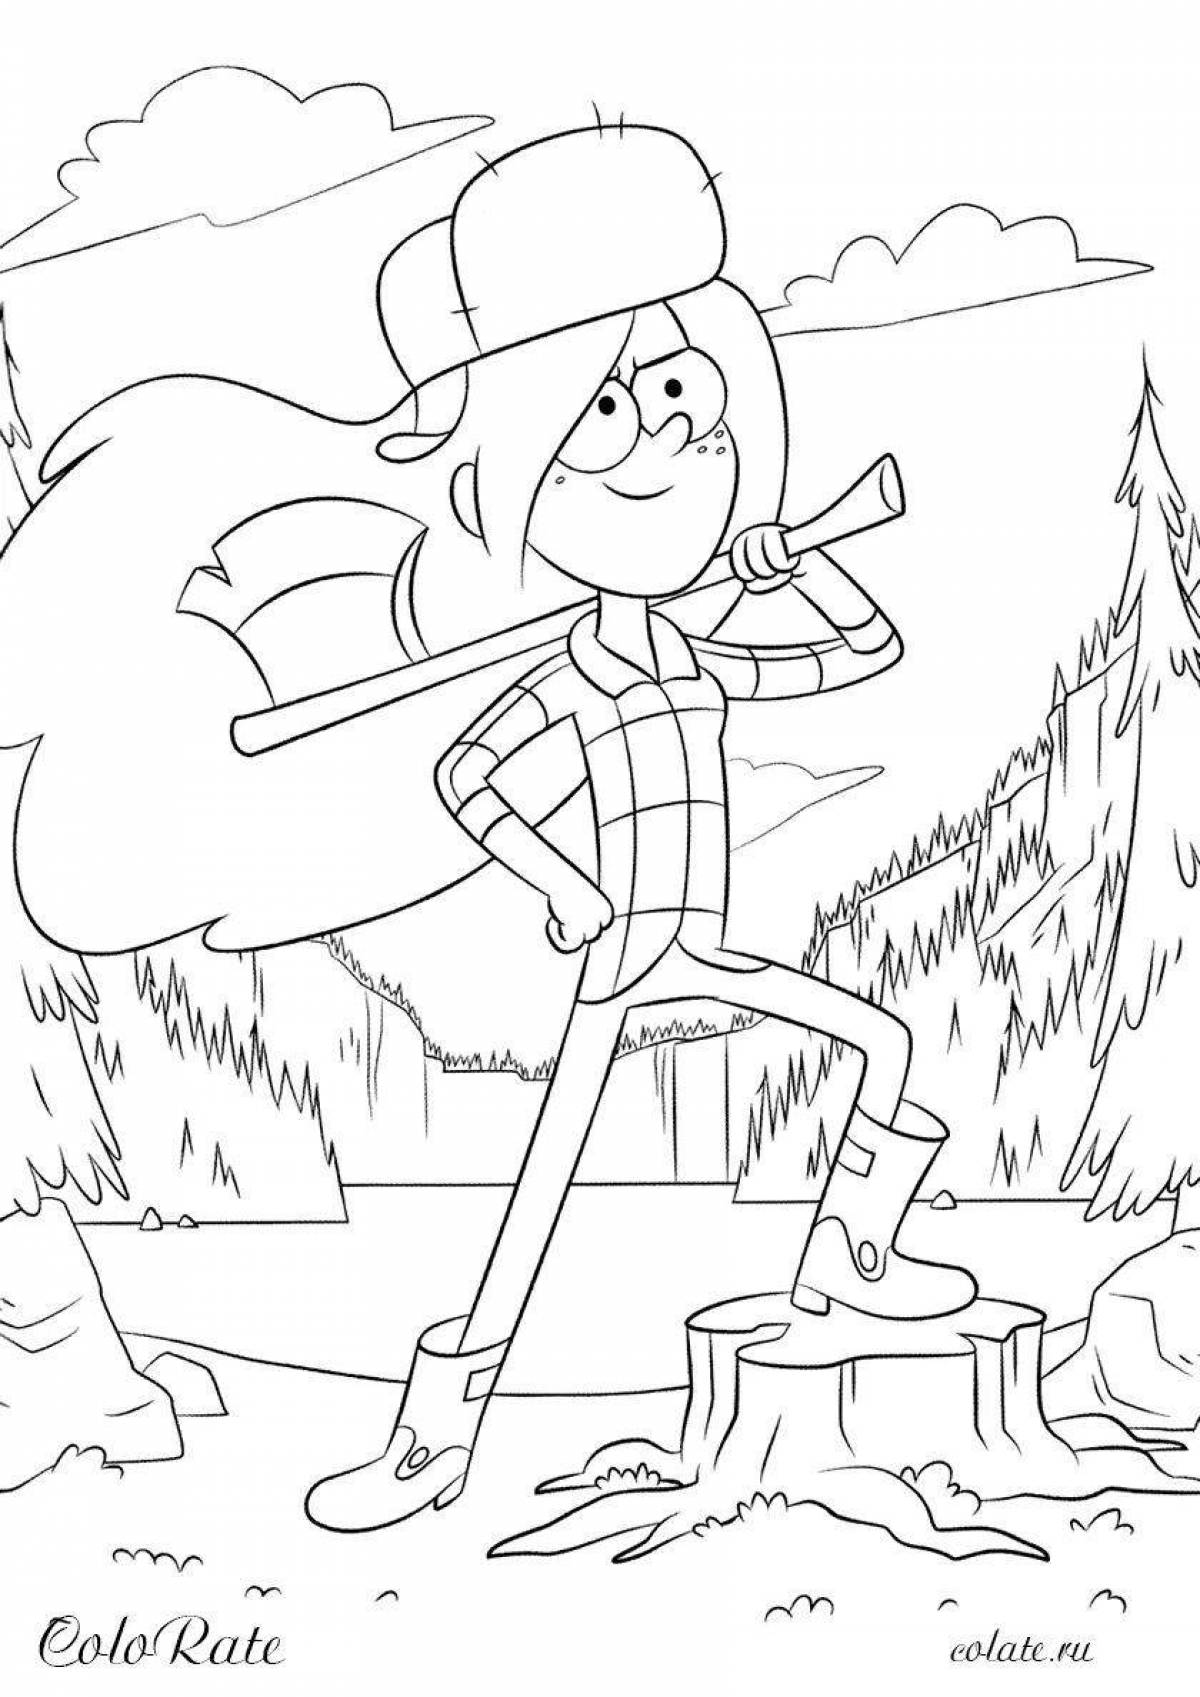 Wendy's adorable gravity falls coloring book